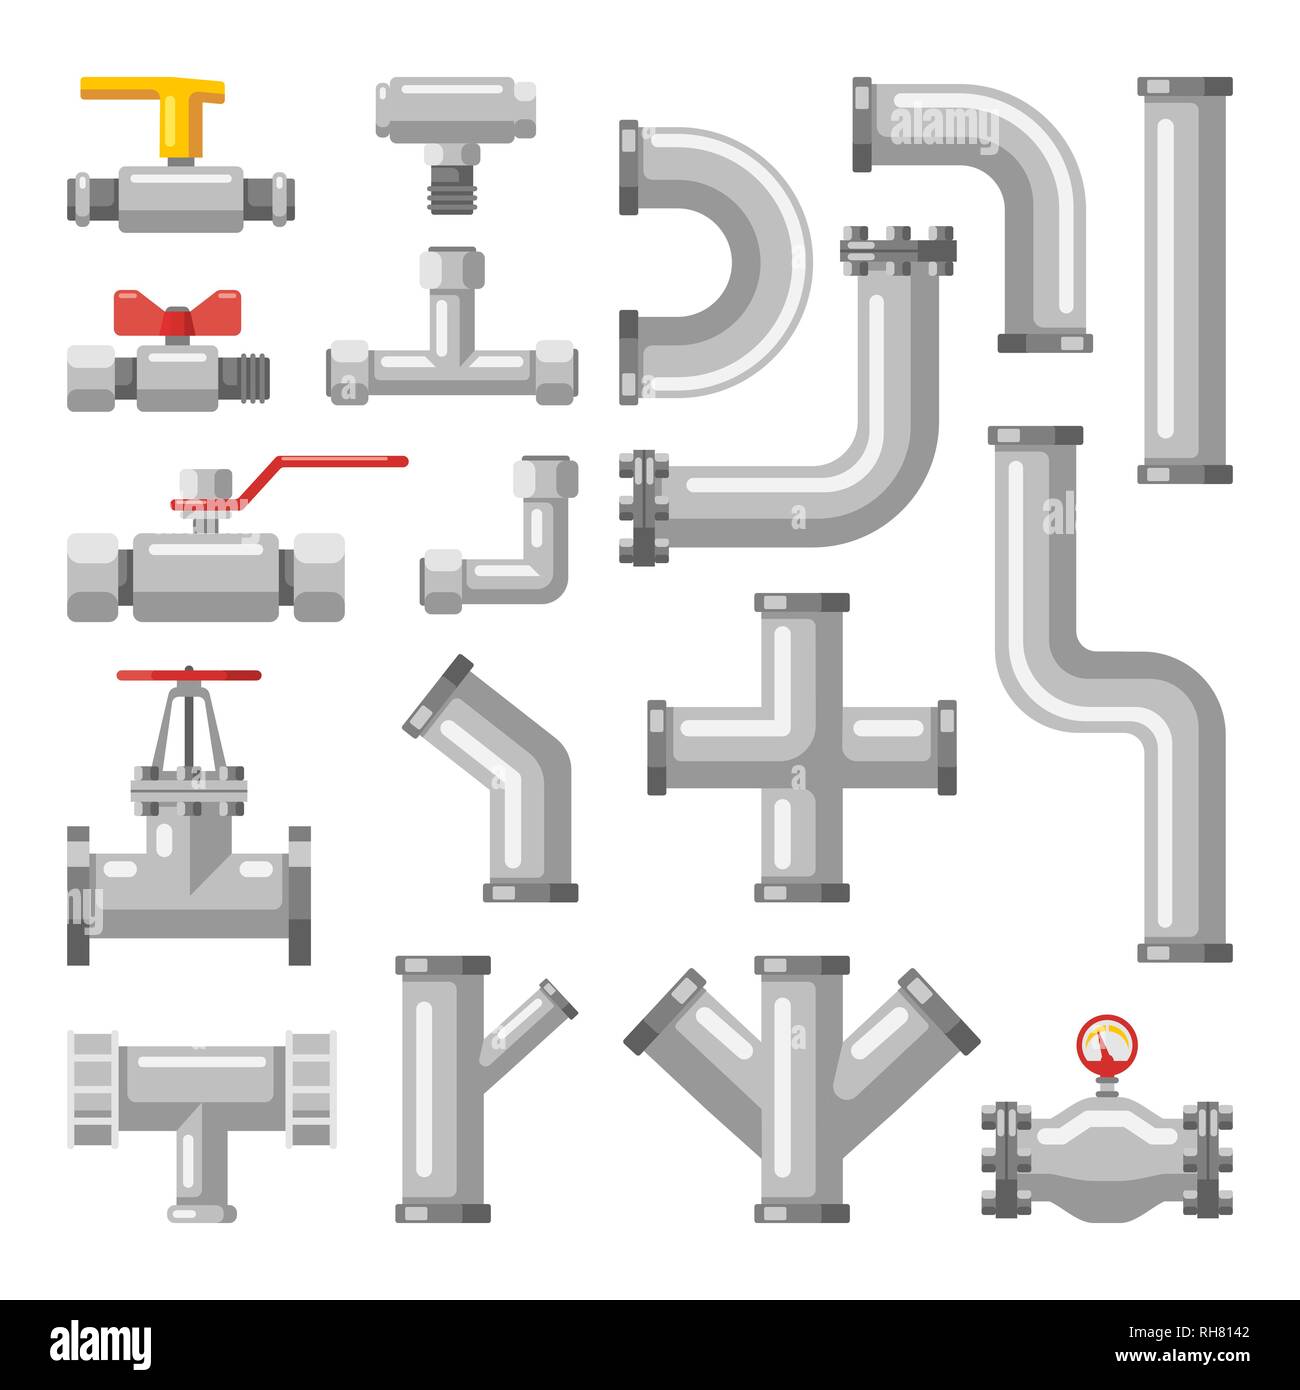 Pipe or pipeline parts, valves for water, oil, gas Stock Vector